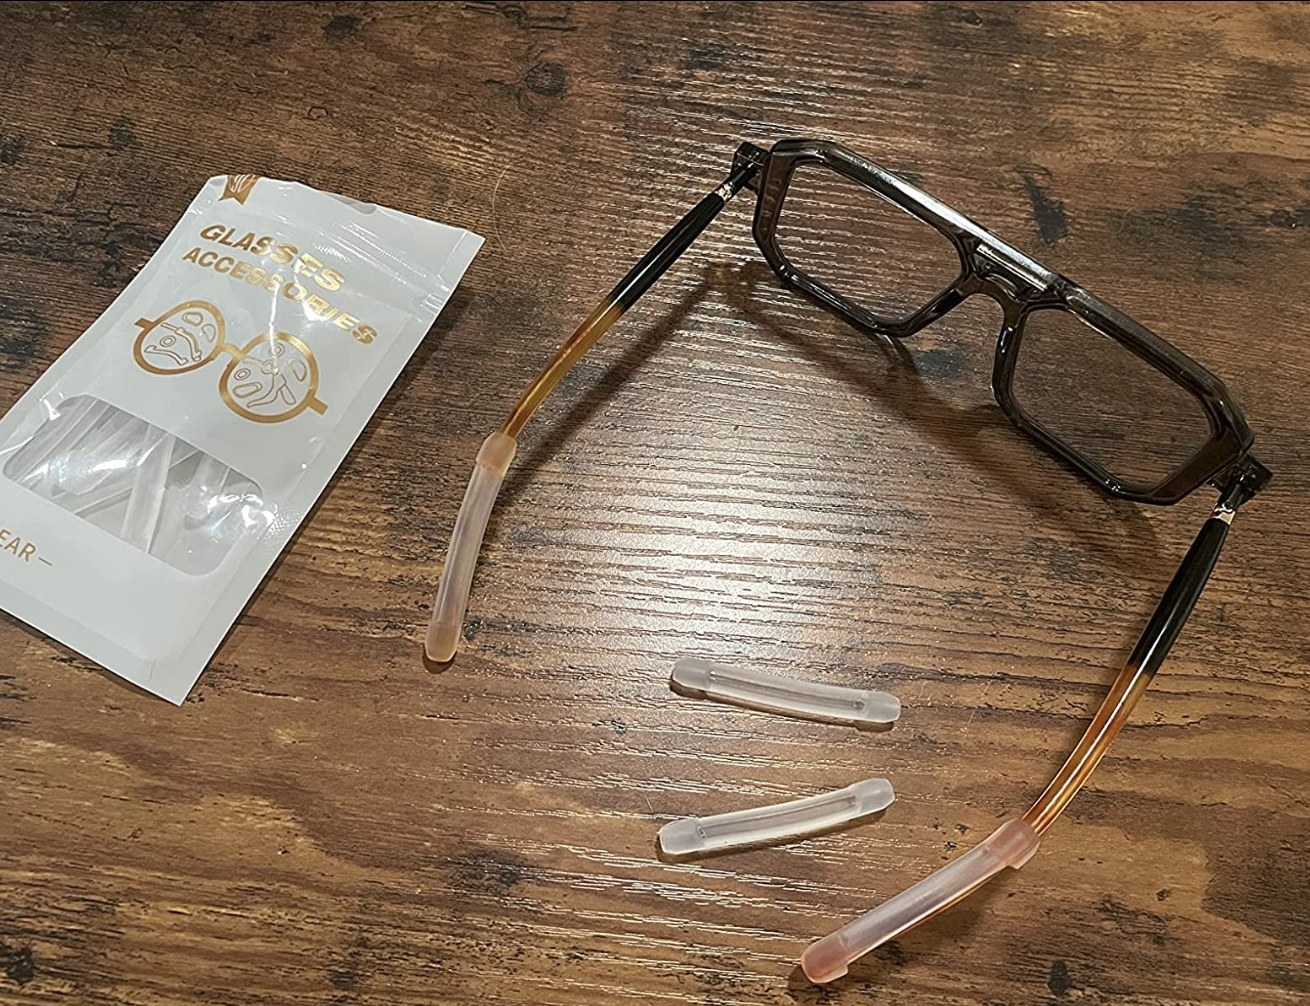 The product on glasses